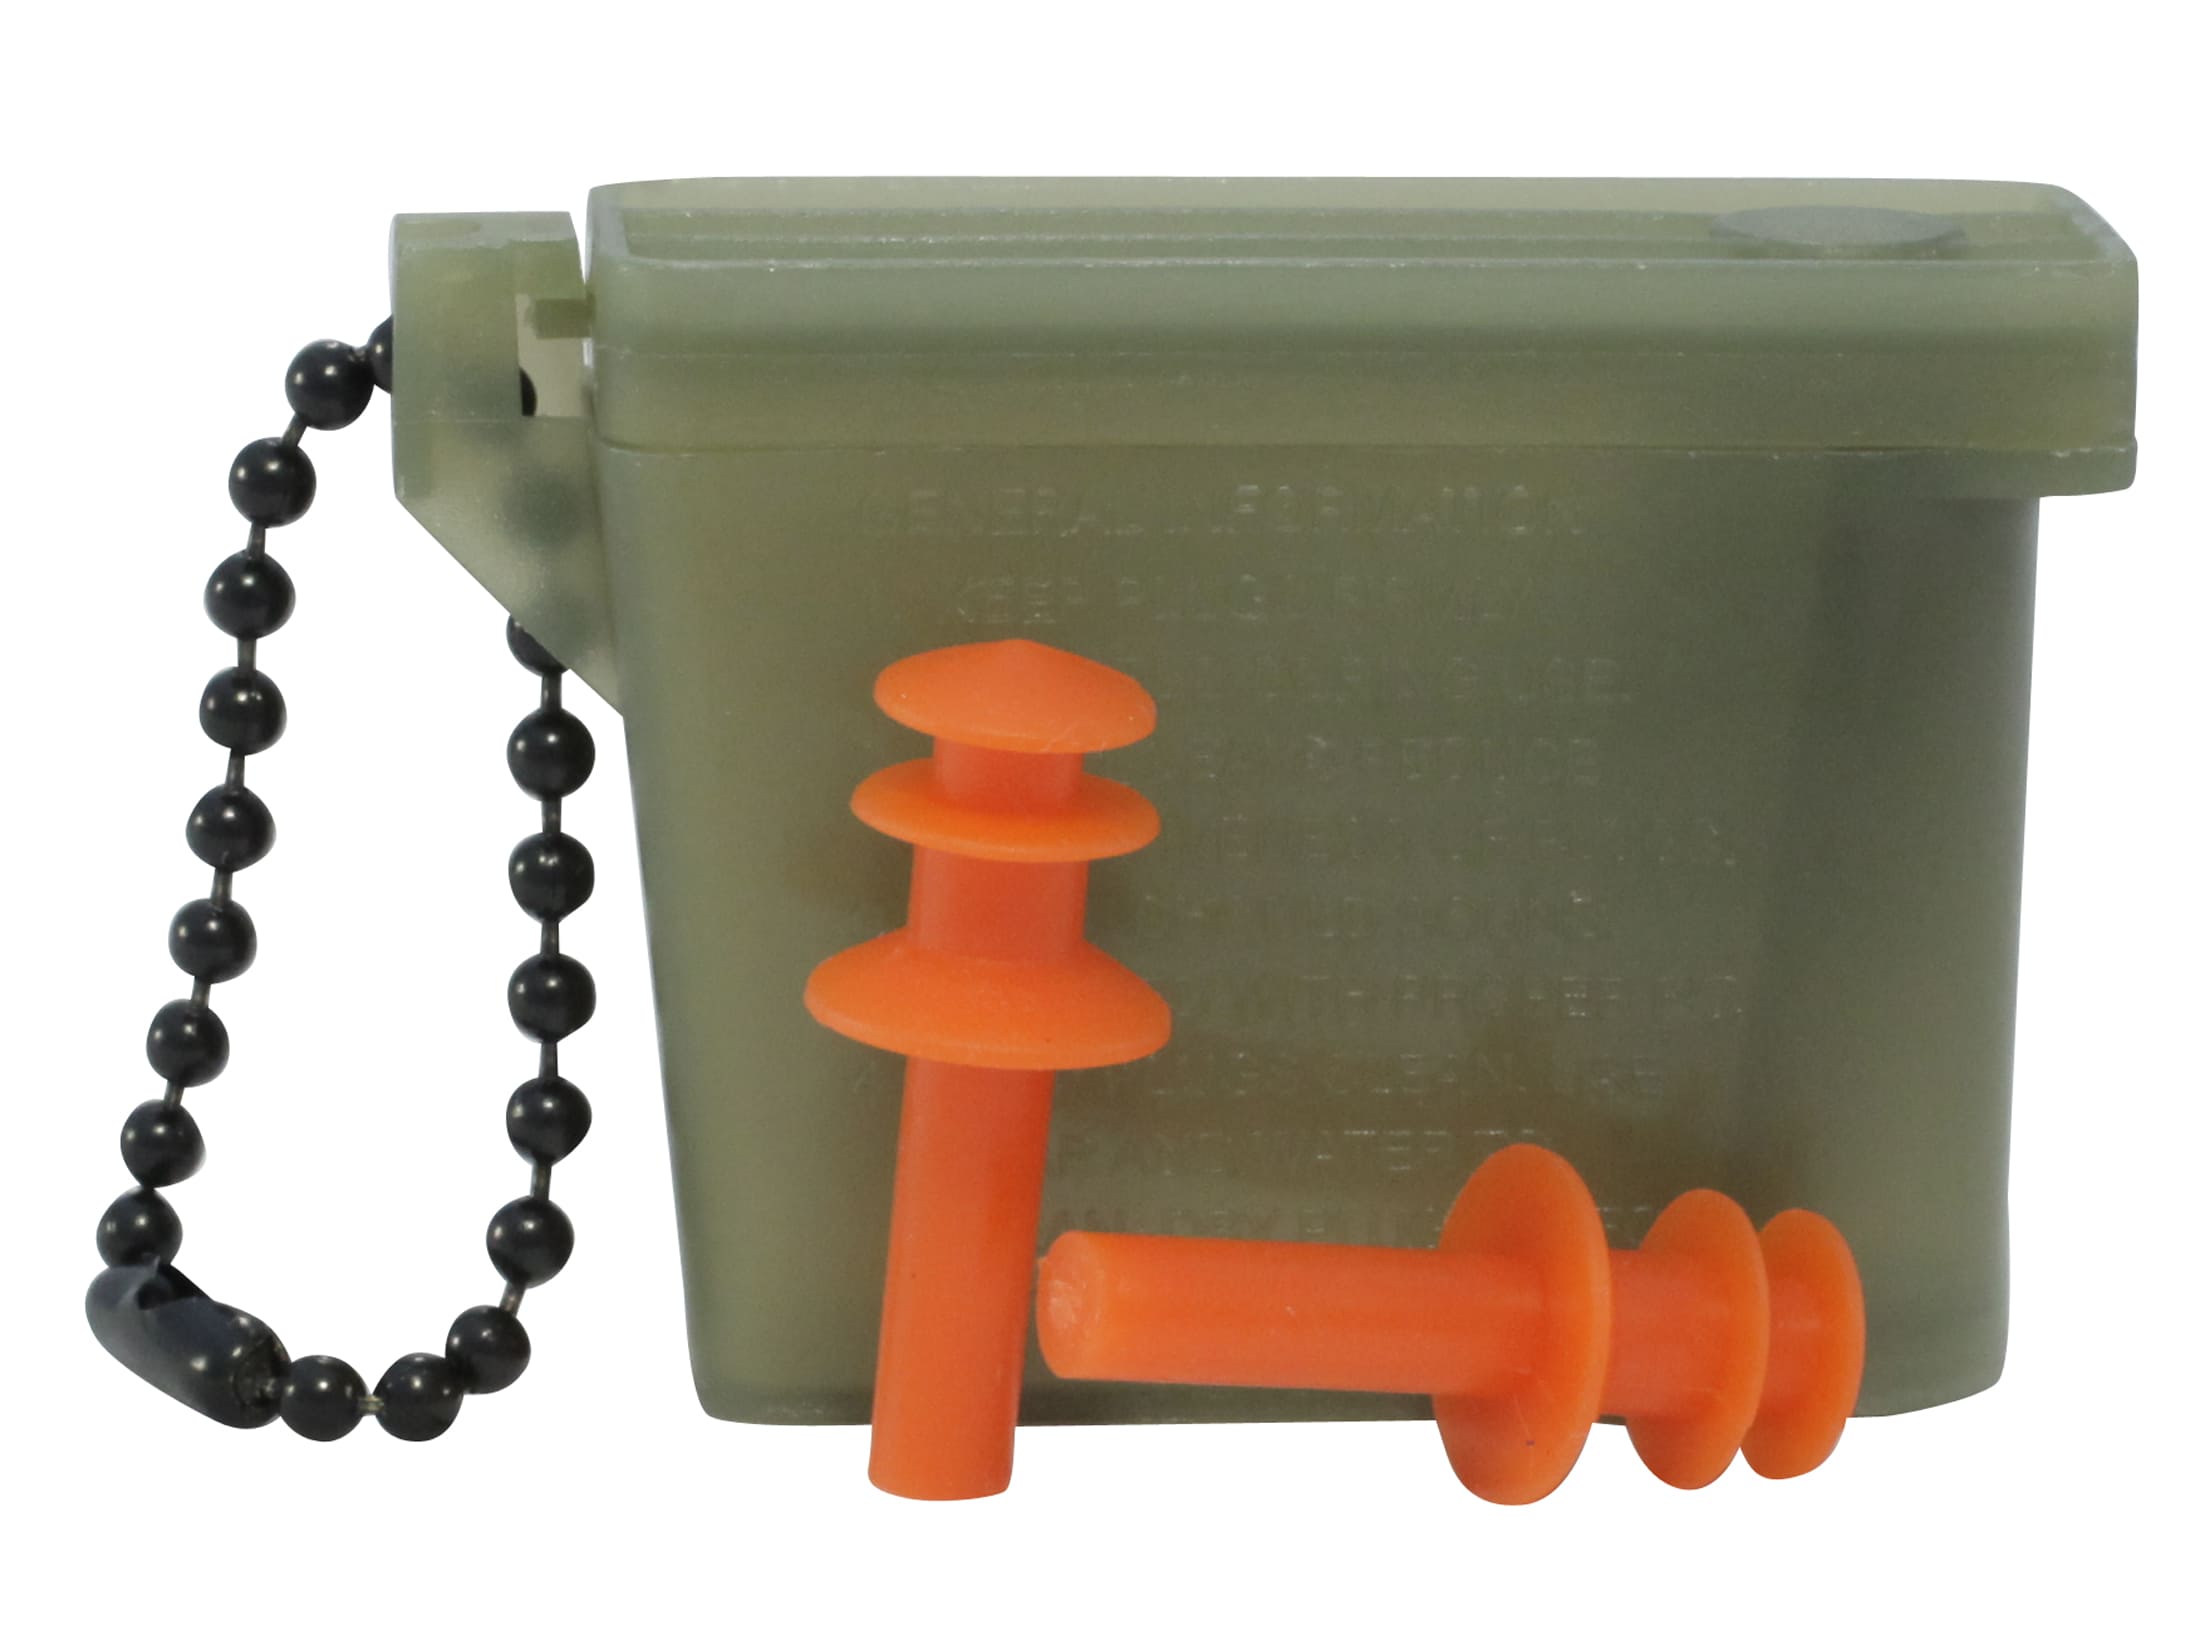 Earplug Case by Ordinary Contraptions